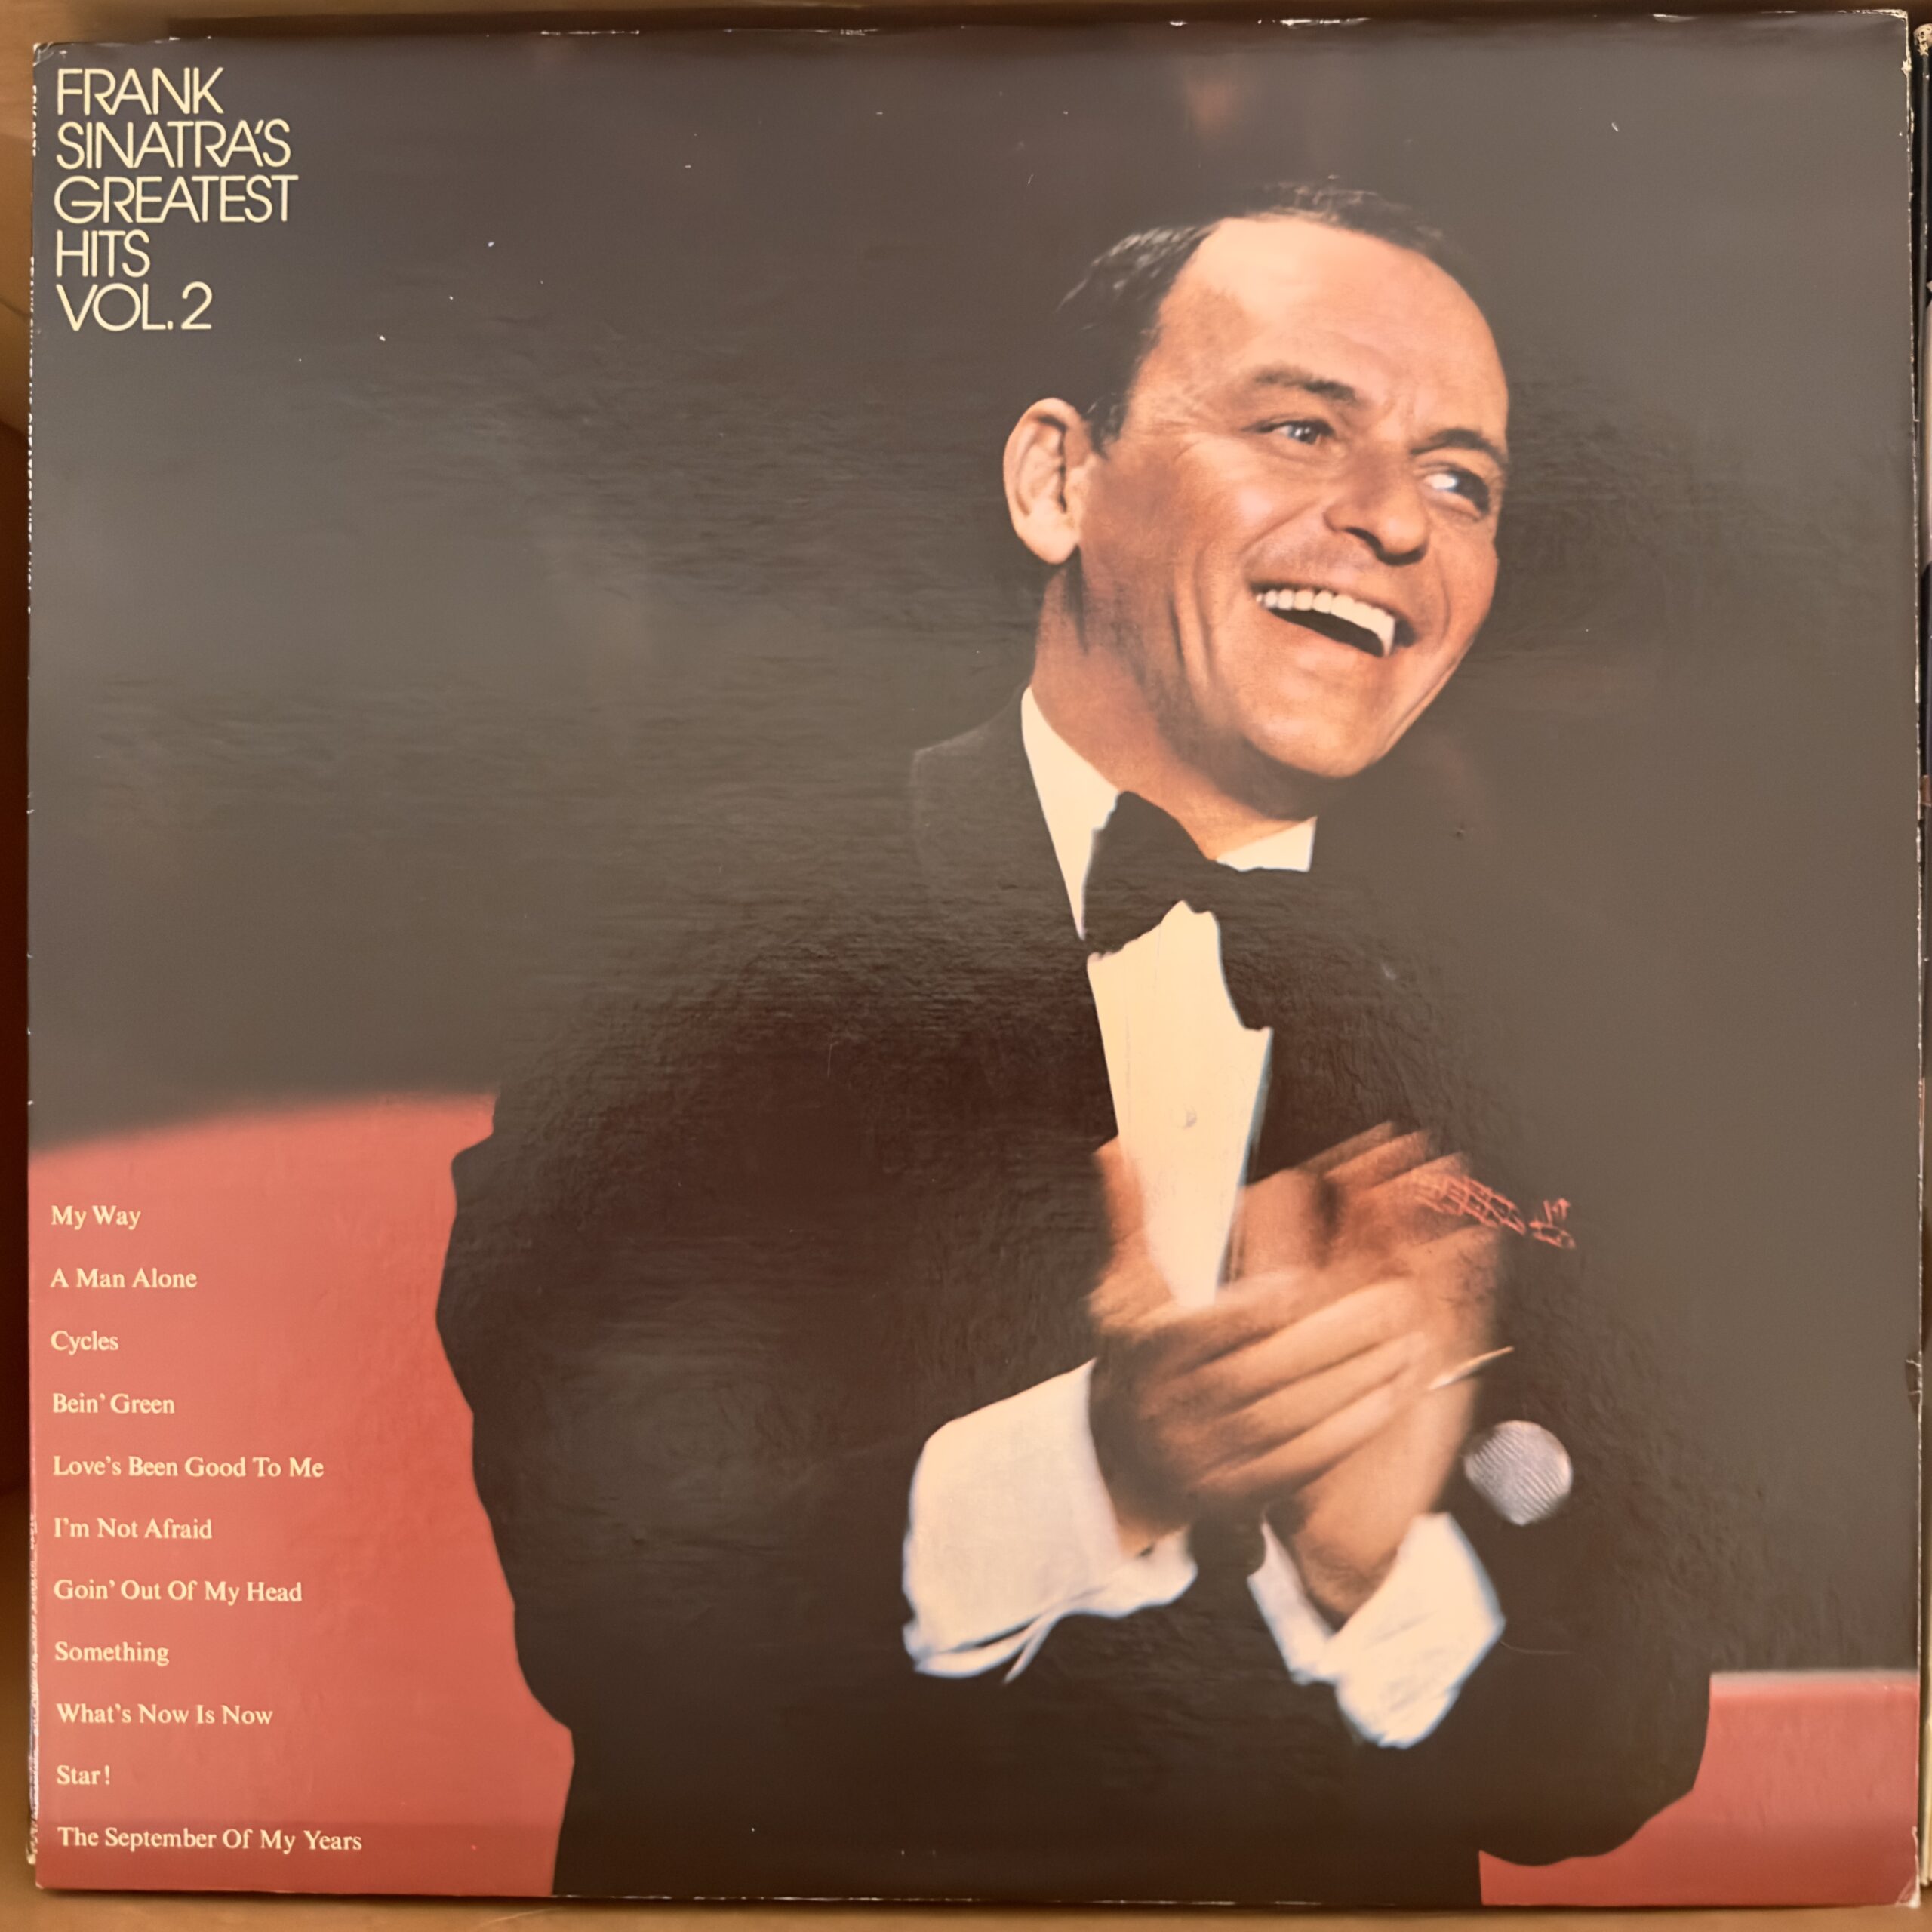 Frank Sinatra S Greatest Hits Vol 2 Vinyl Record Album Review Colossal Reviews